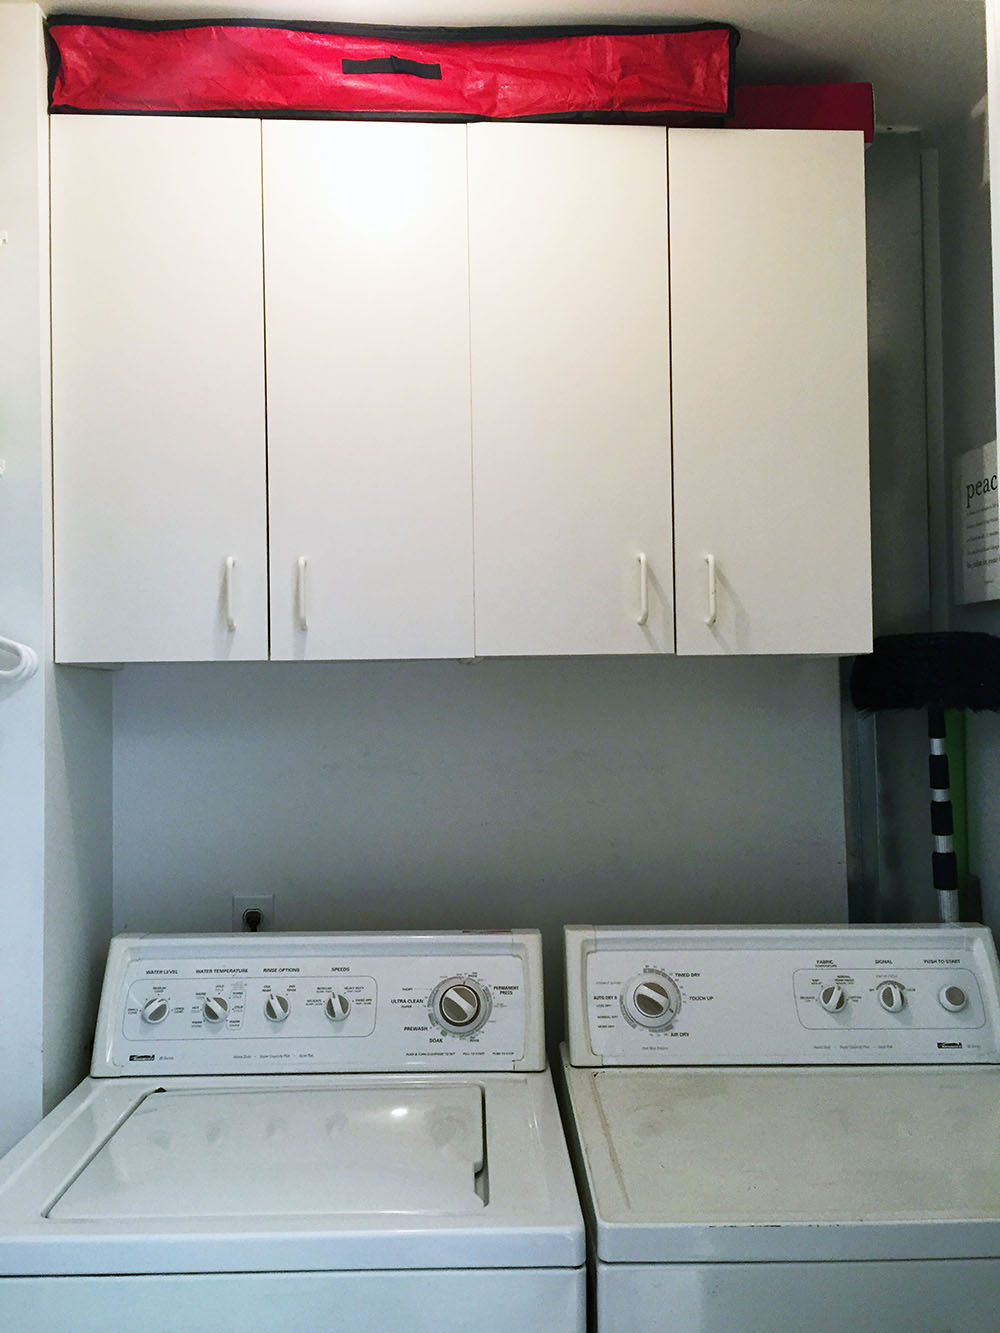 organizing starts with the cabinets above the washer